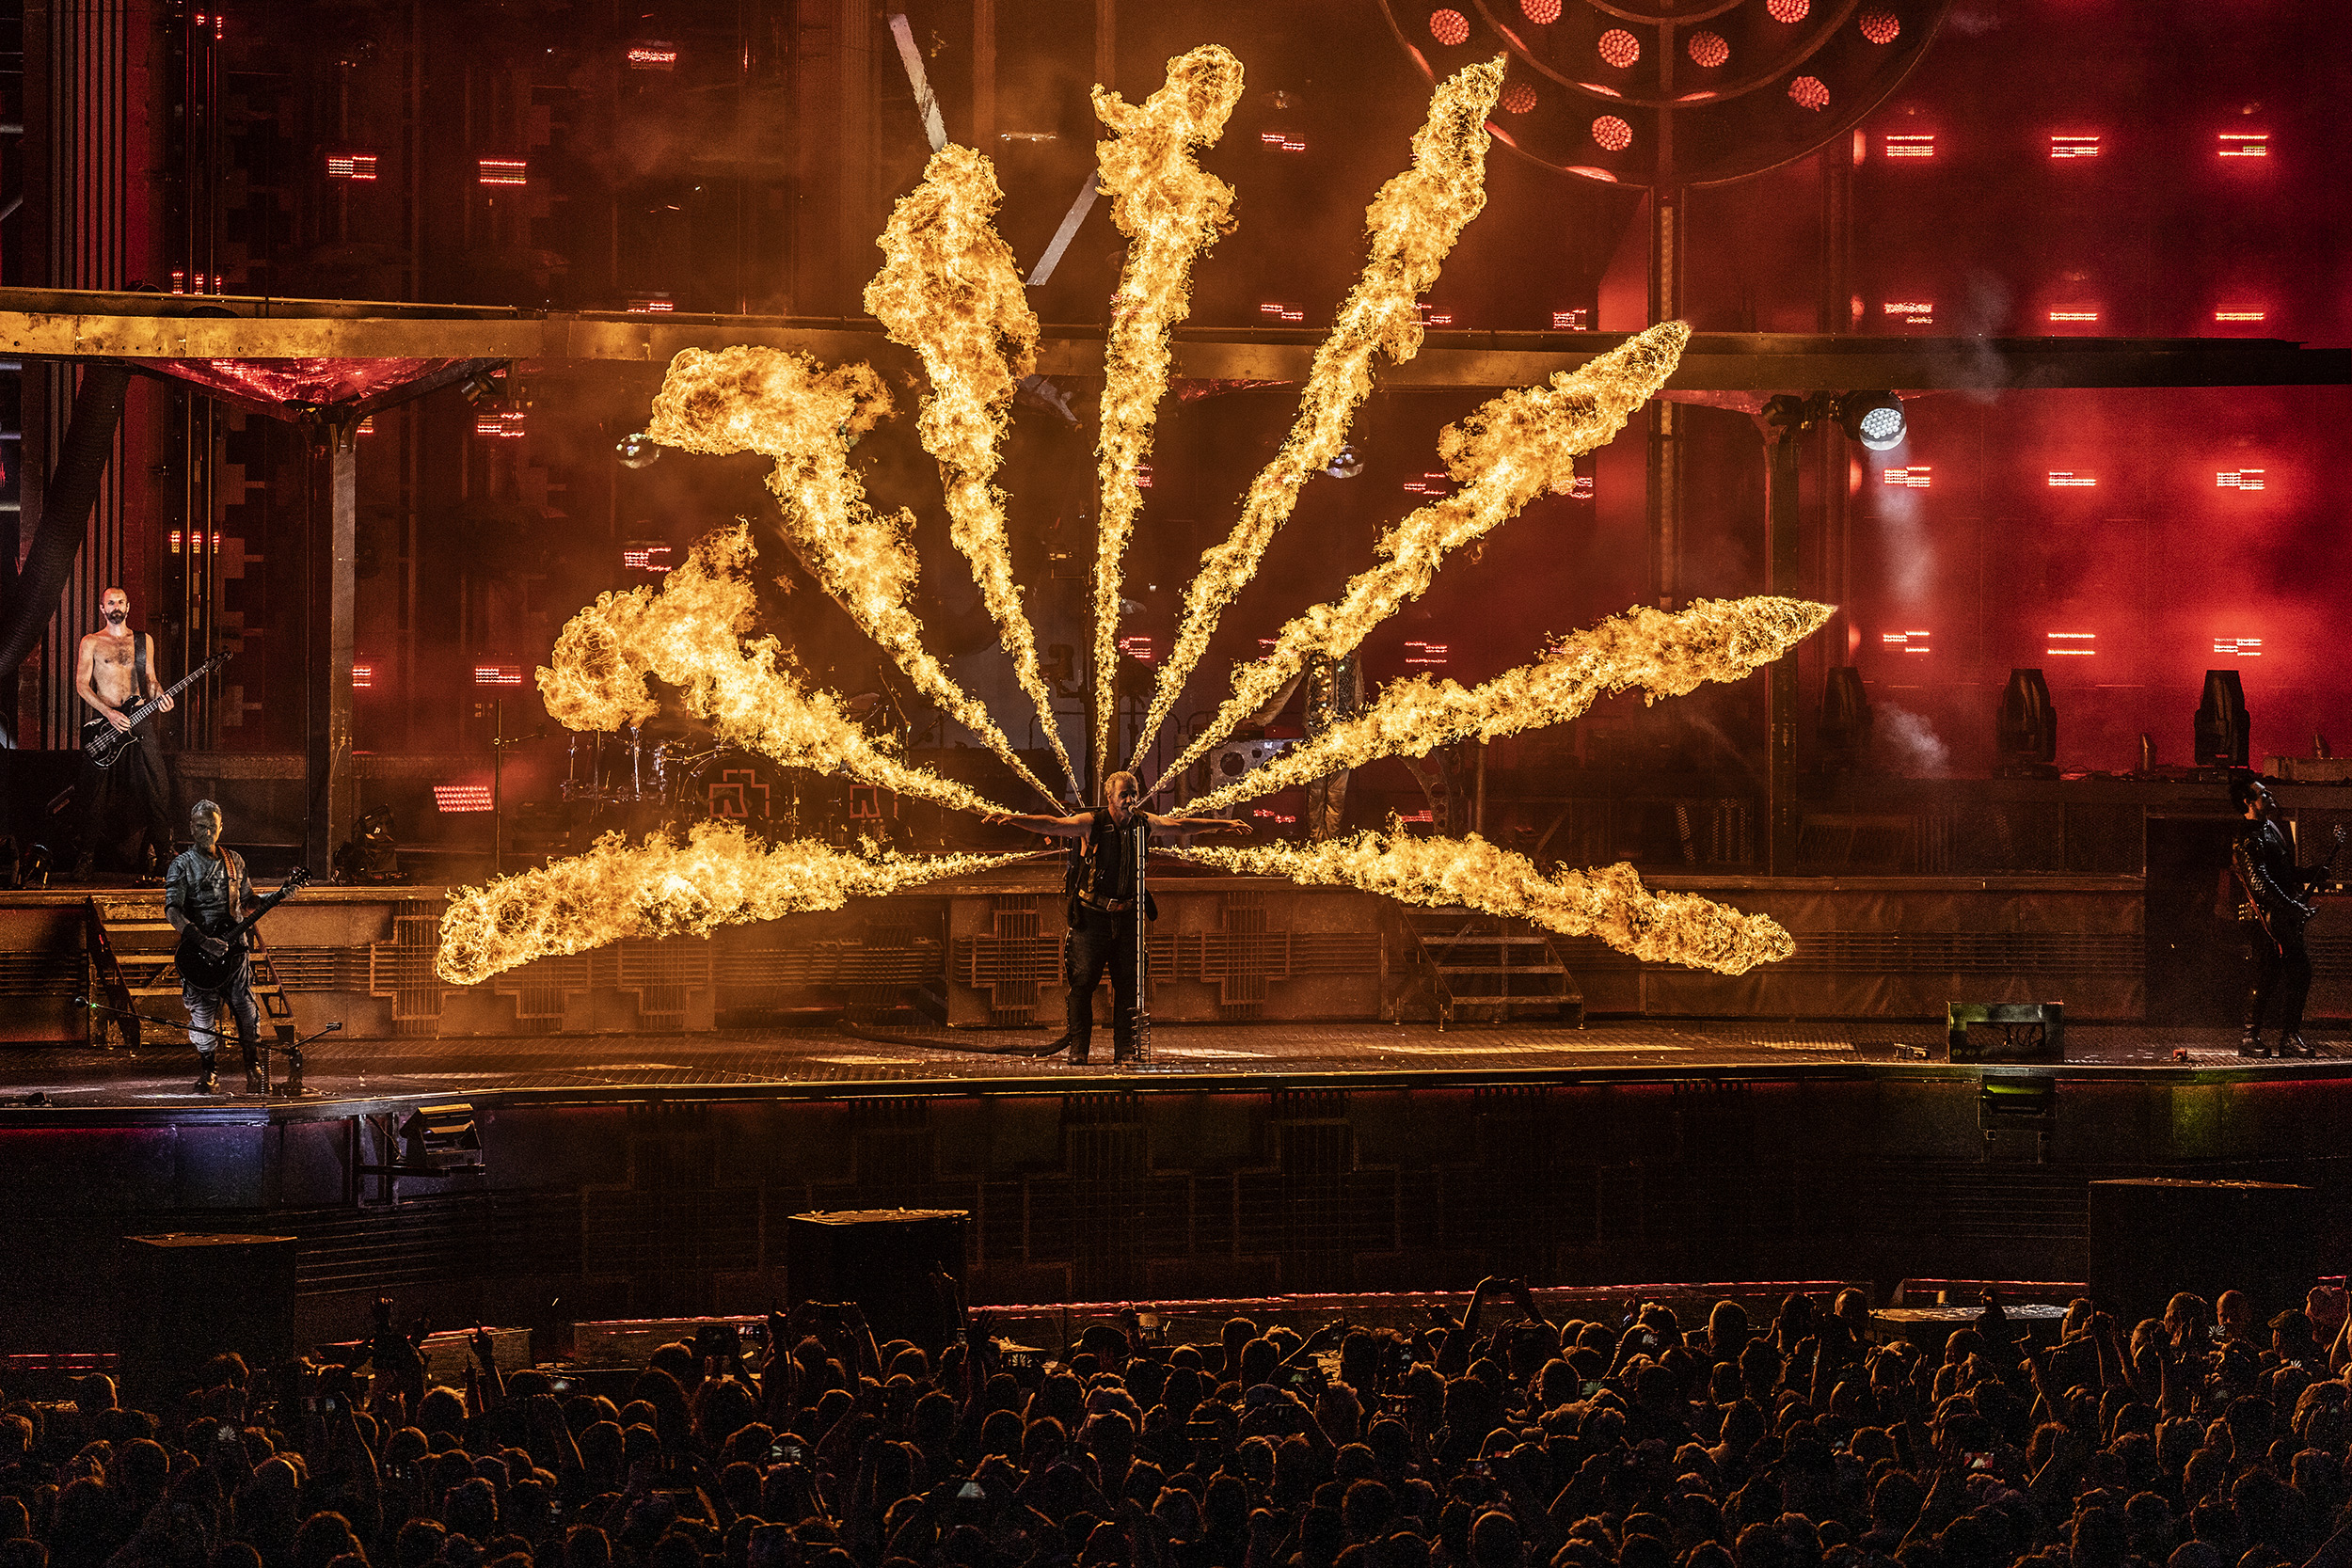 rammstein-playing-live-on-stage-with-a-fire-display.jpeg